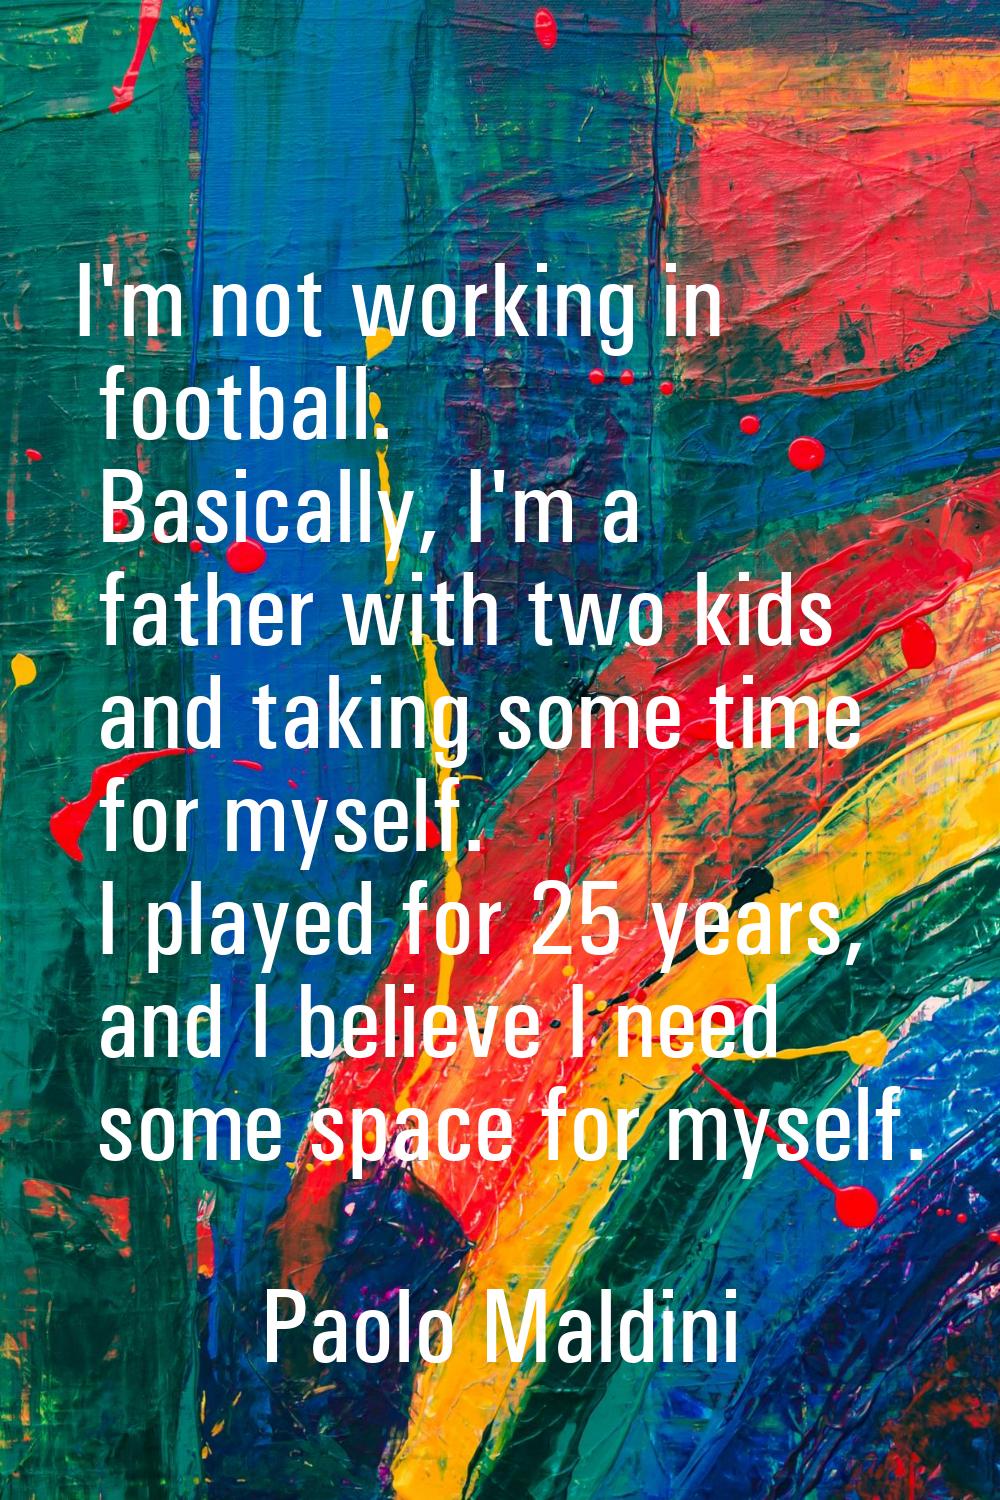 I'm not working in football. Basically, I'm a father with two kids and taking some time for myself.